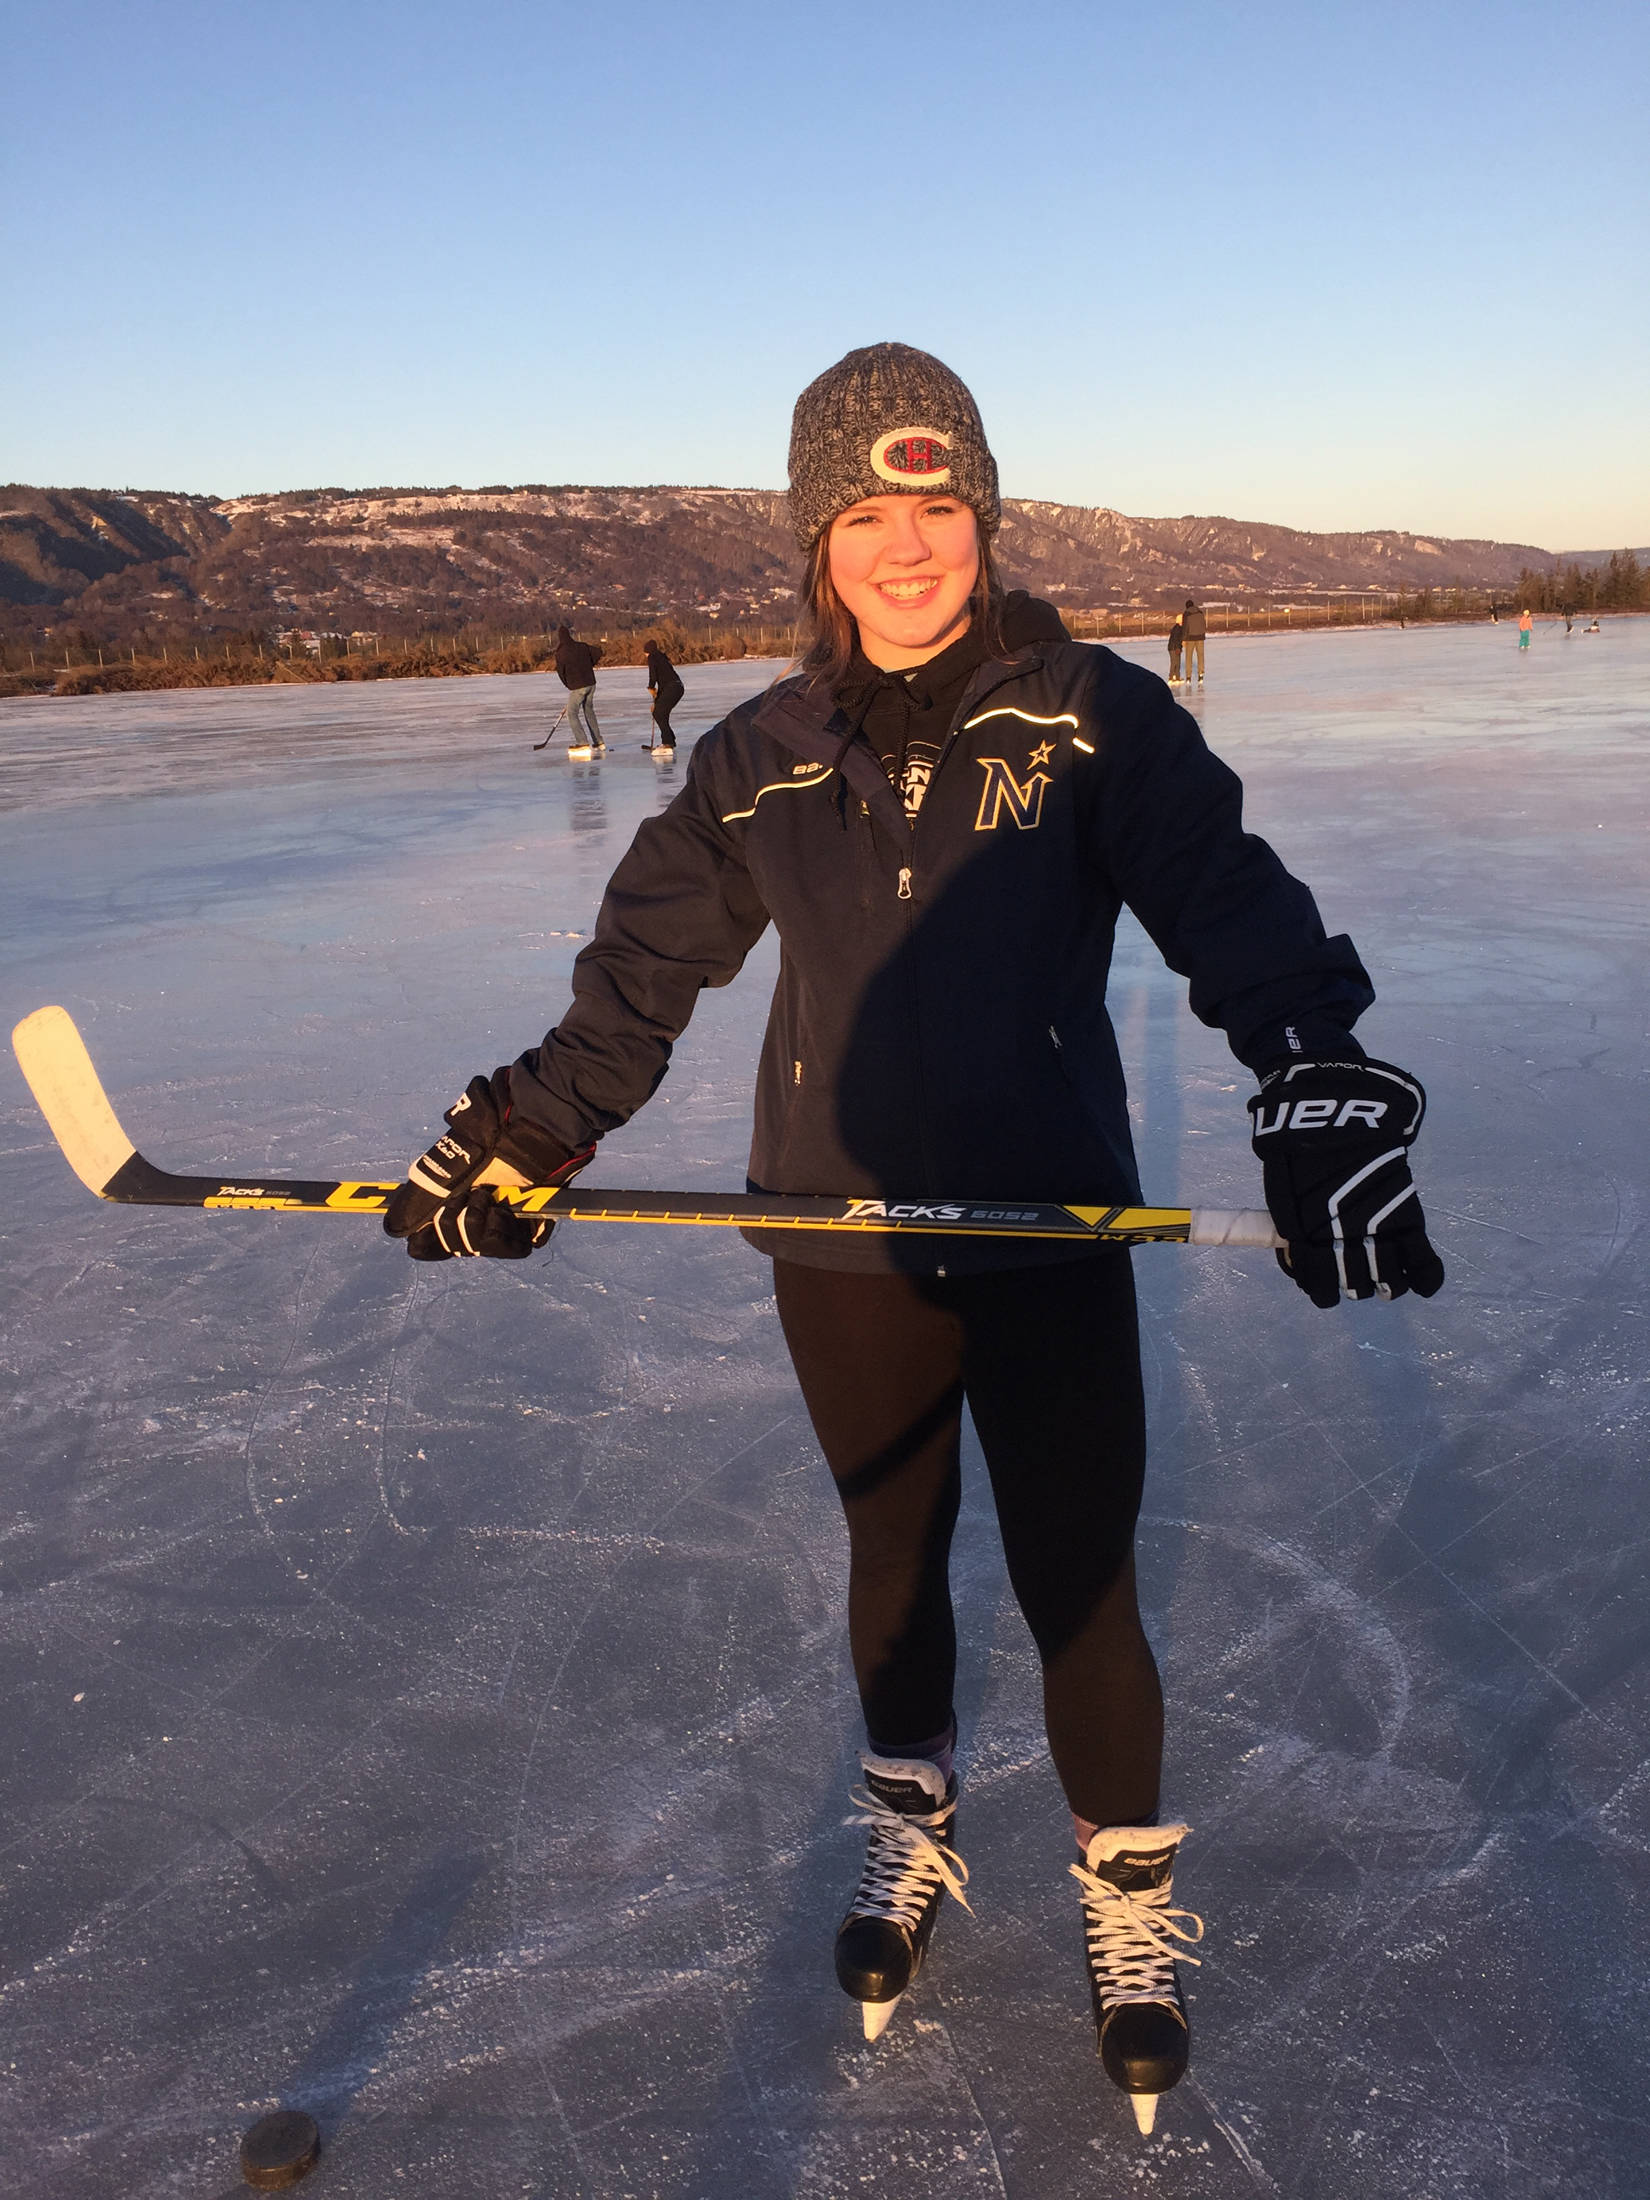 Homer High School senior Mychaela Pitta, pictured here playing hockey on Beluga Lake with friends, is off to a nearly year-long hockey academy in Canada. Having skated since the time she was 3 years old, Pitta hopes to continue with hockey as far as it will take her. (Photo courtesy Lisa Pitta)